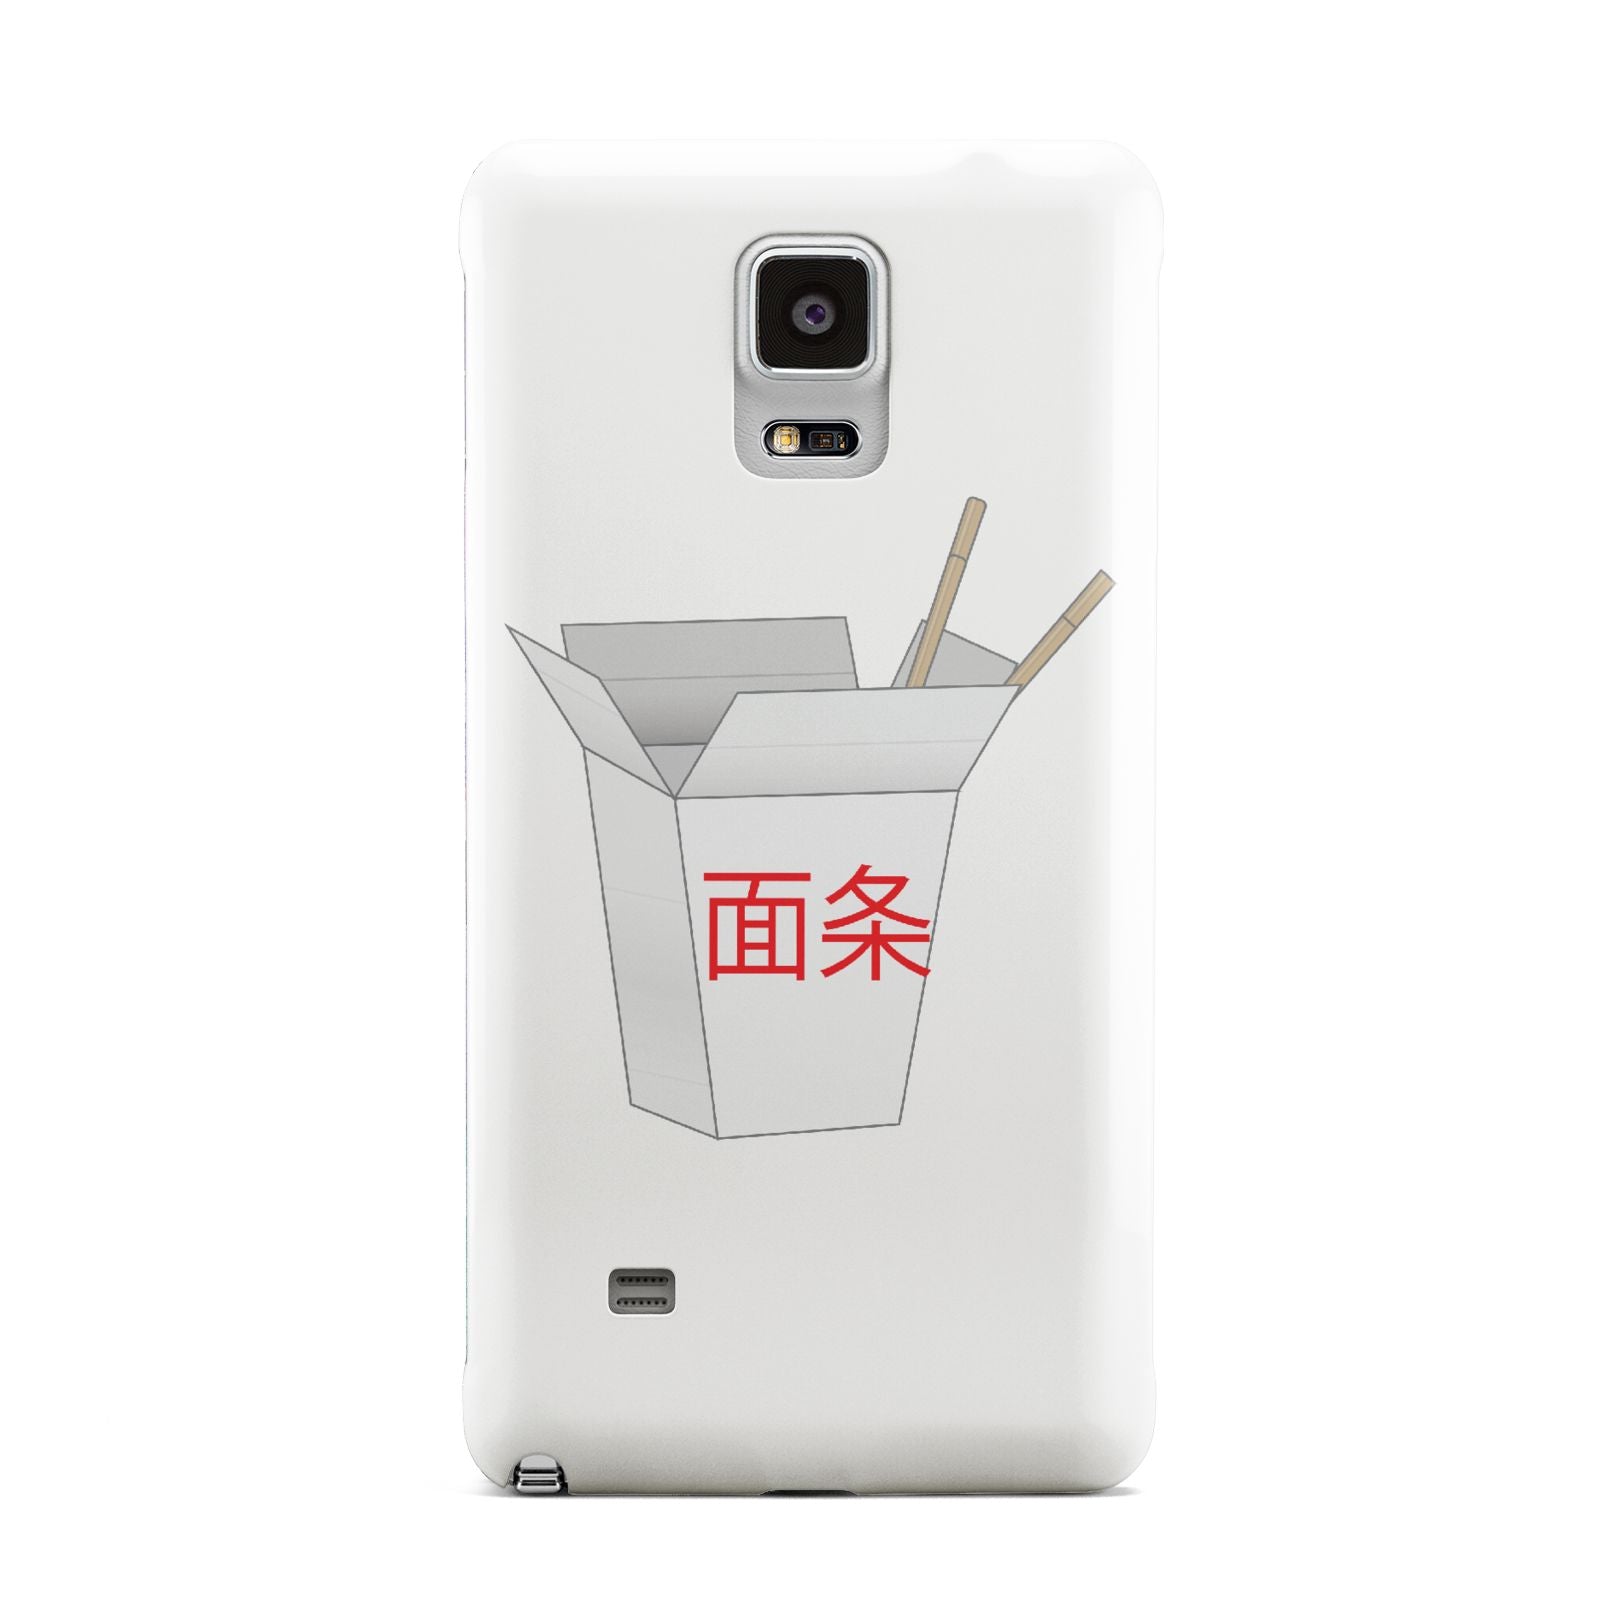 Chinese Takeaway Box Samsung Galaxy Note 4 Case